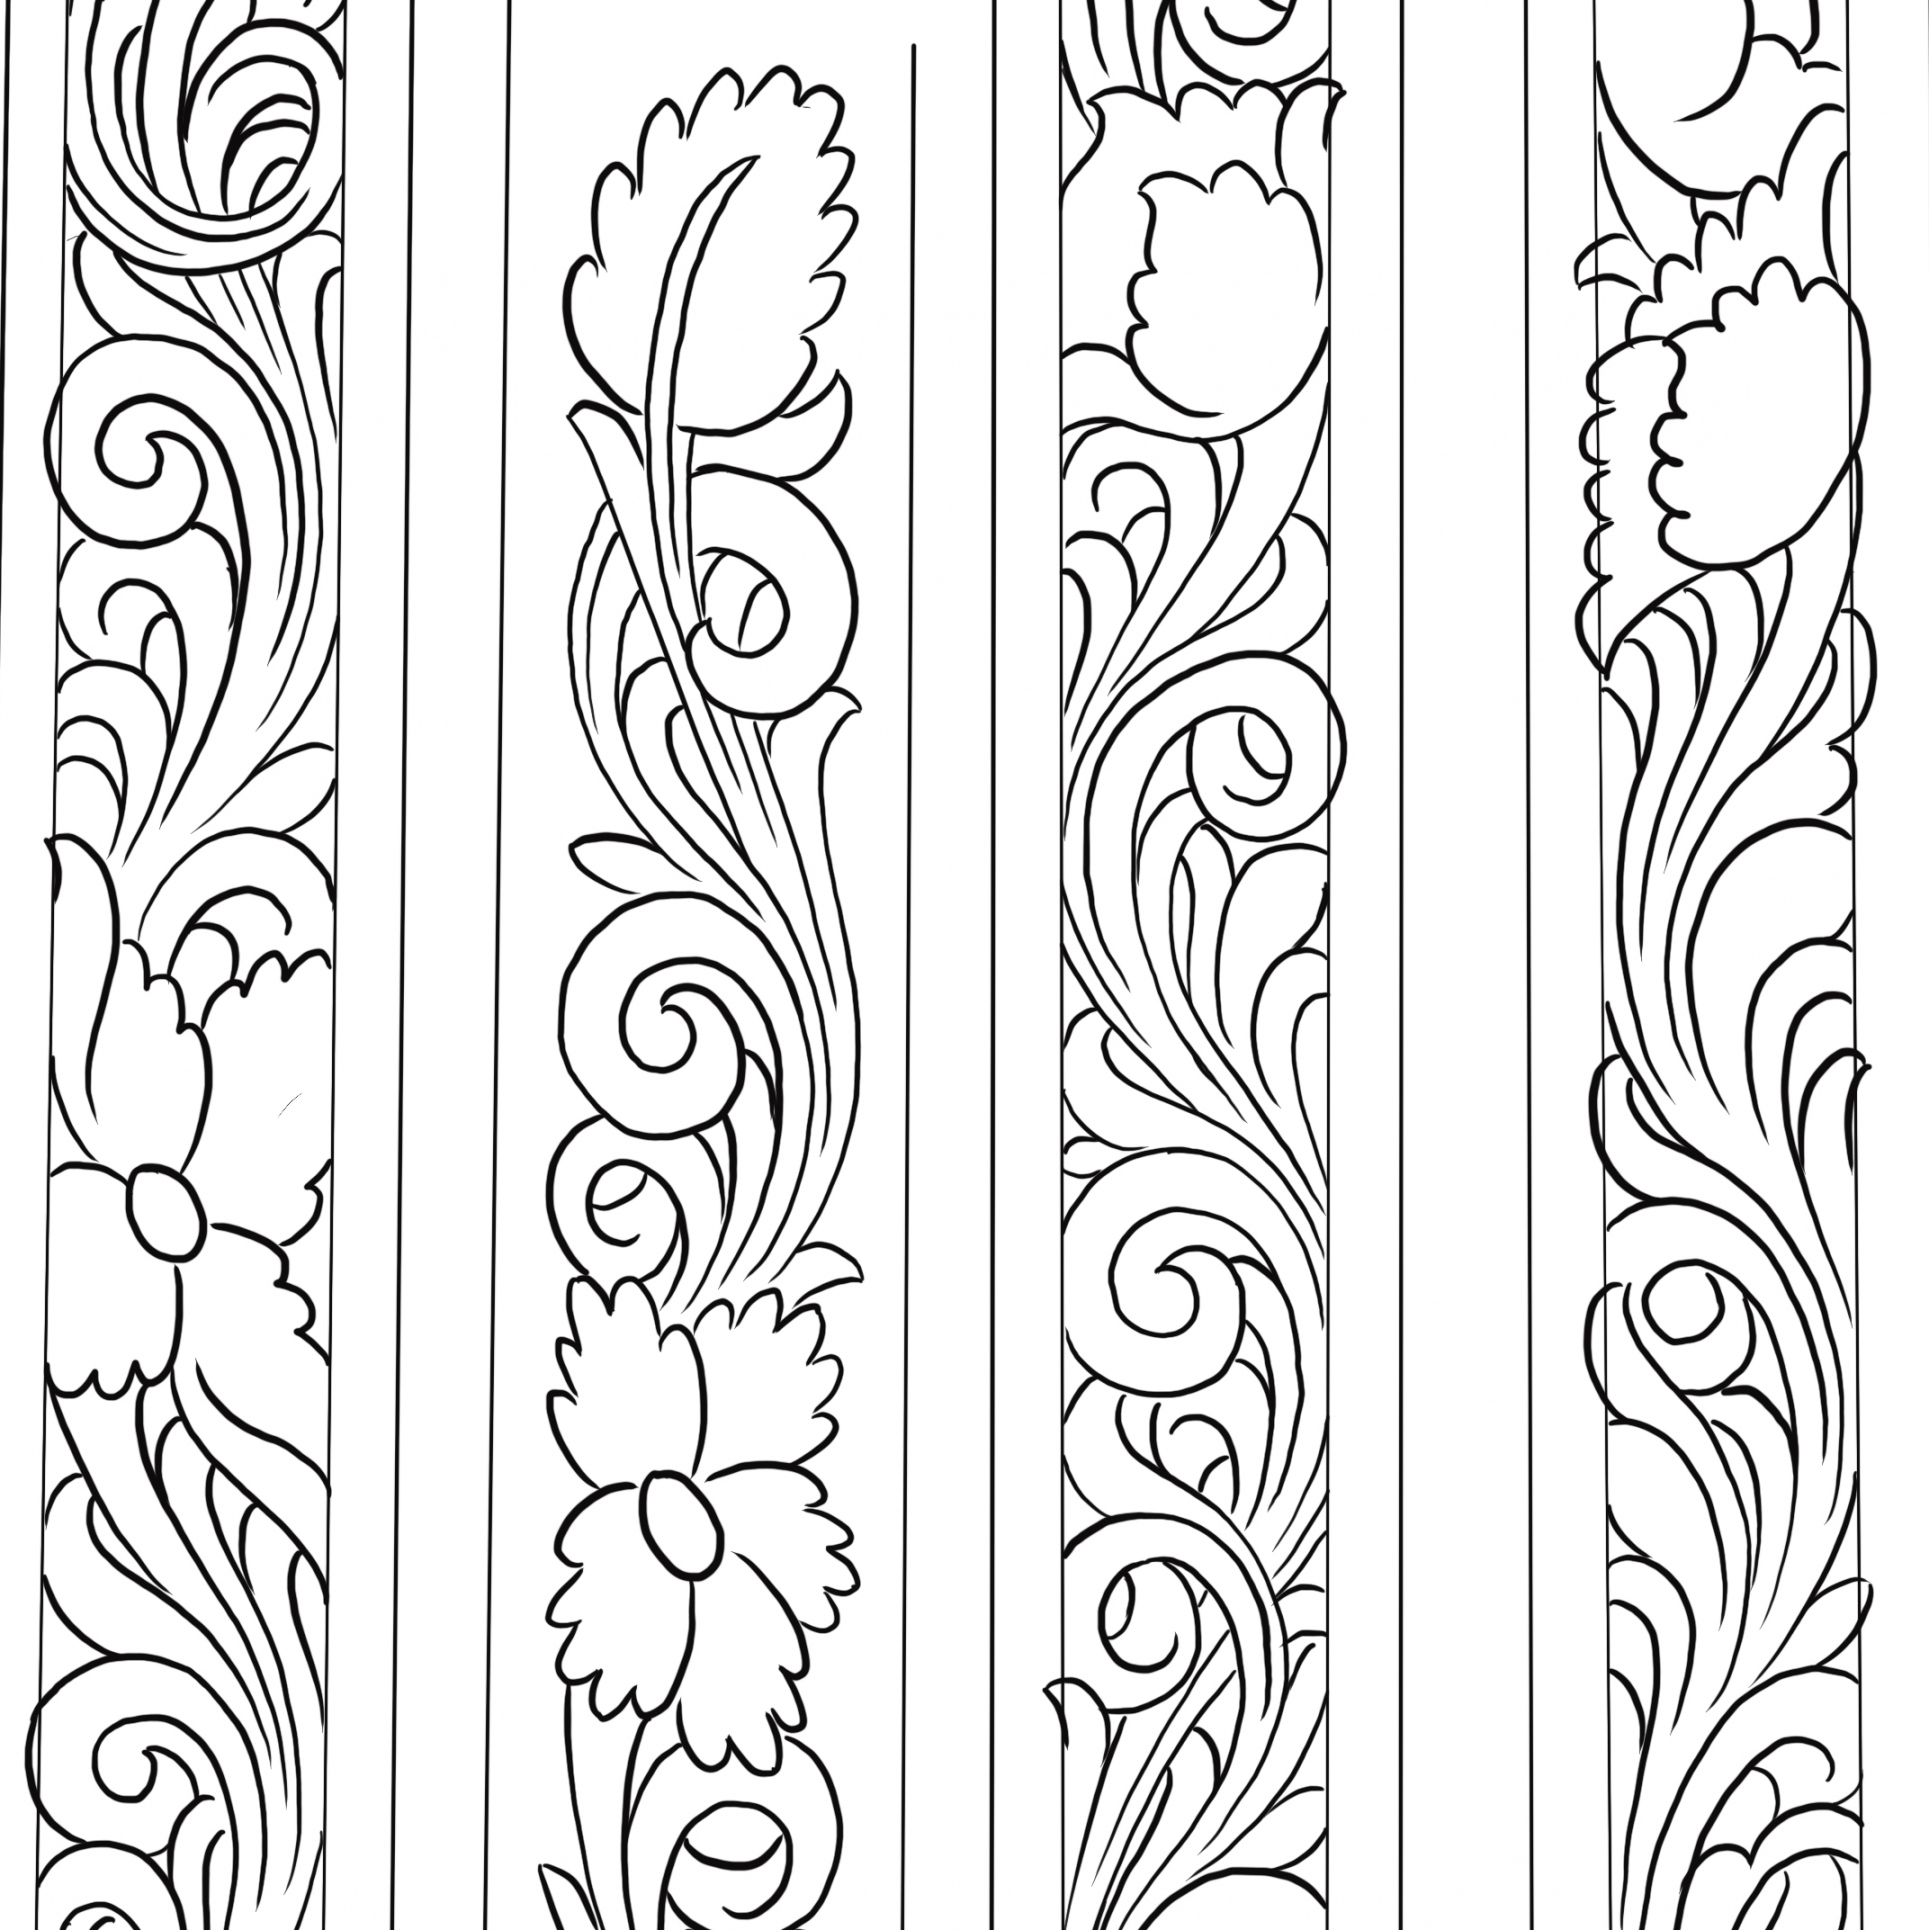 Printable Leather Carving Patterns - Printable Word Searches - FREE Printables - Beginner Free Printable Leather Tooling Patterns